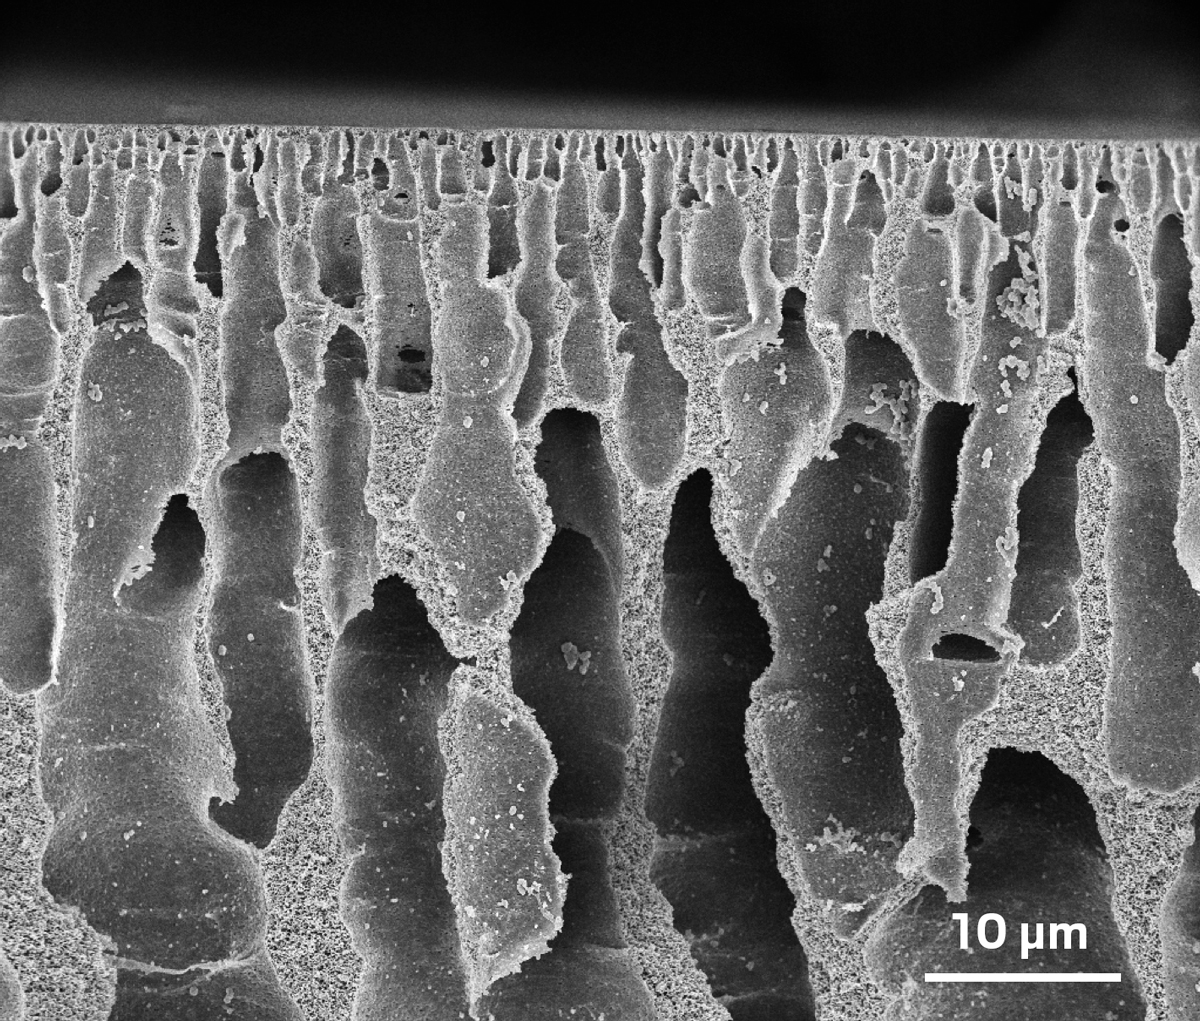 Micrograph showing the pores of a polymer membrane.